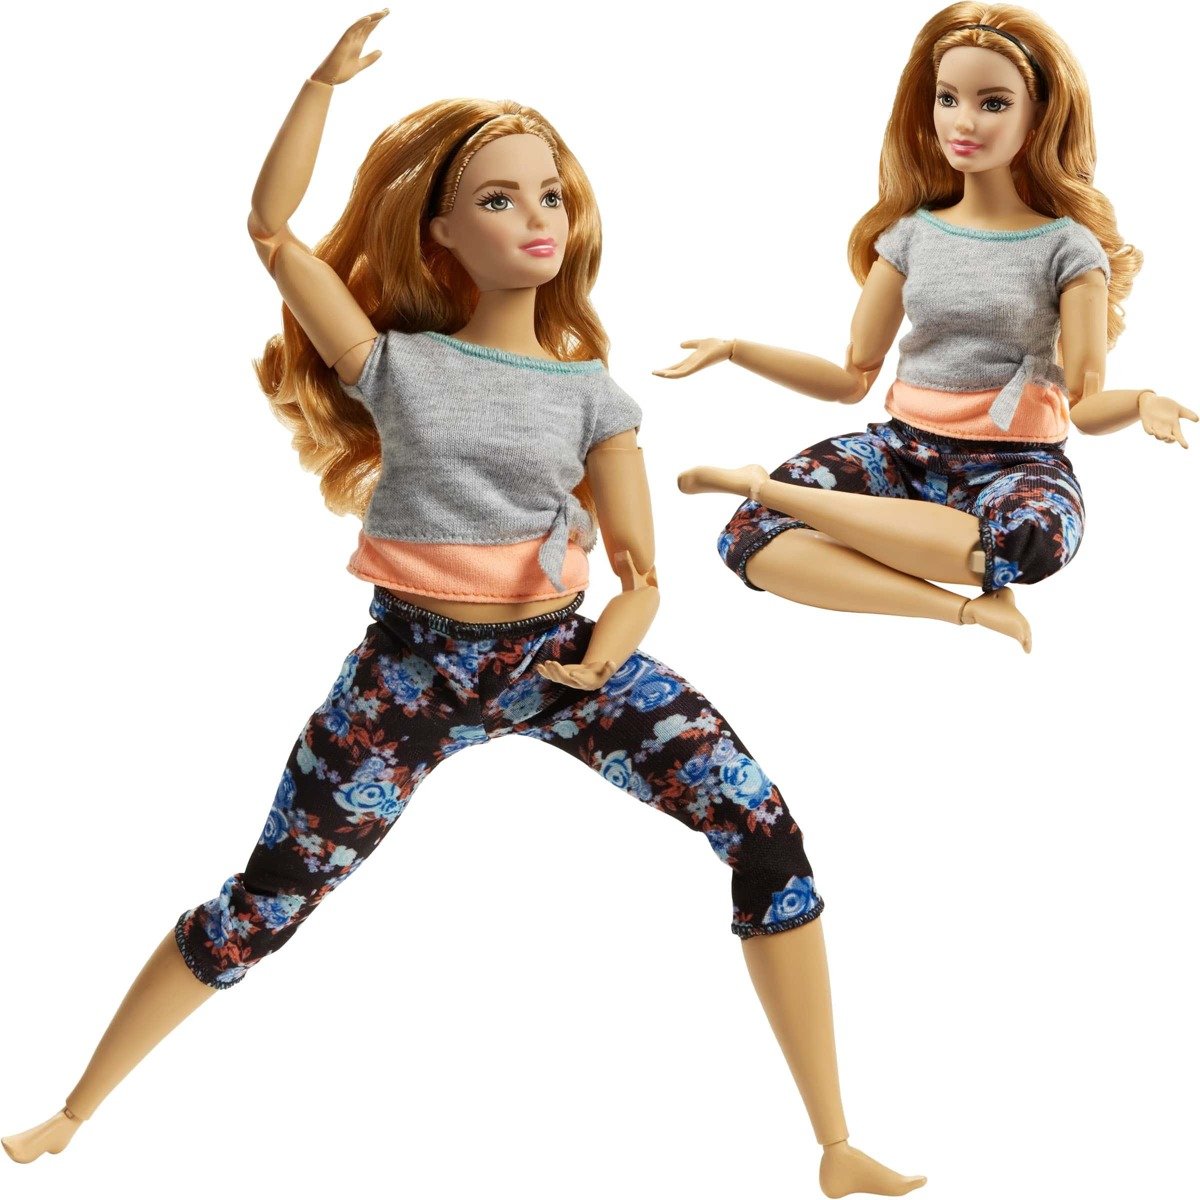 MATTEL Barbie Made To Move Ruchoma lalka fitness